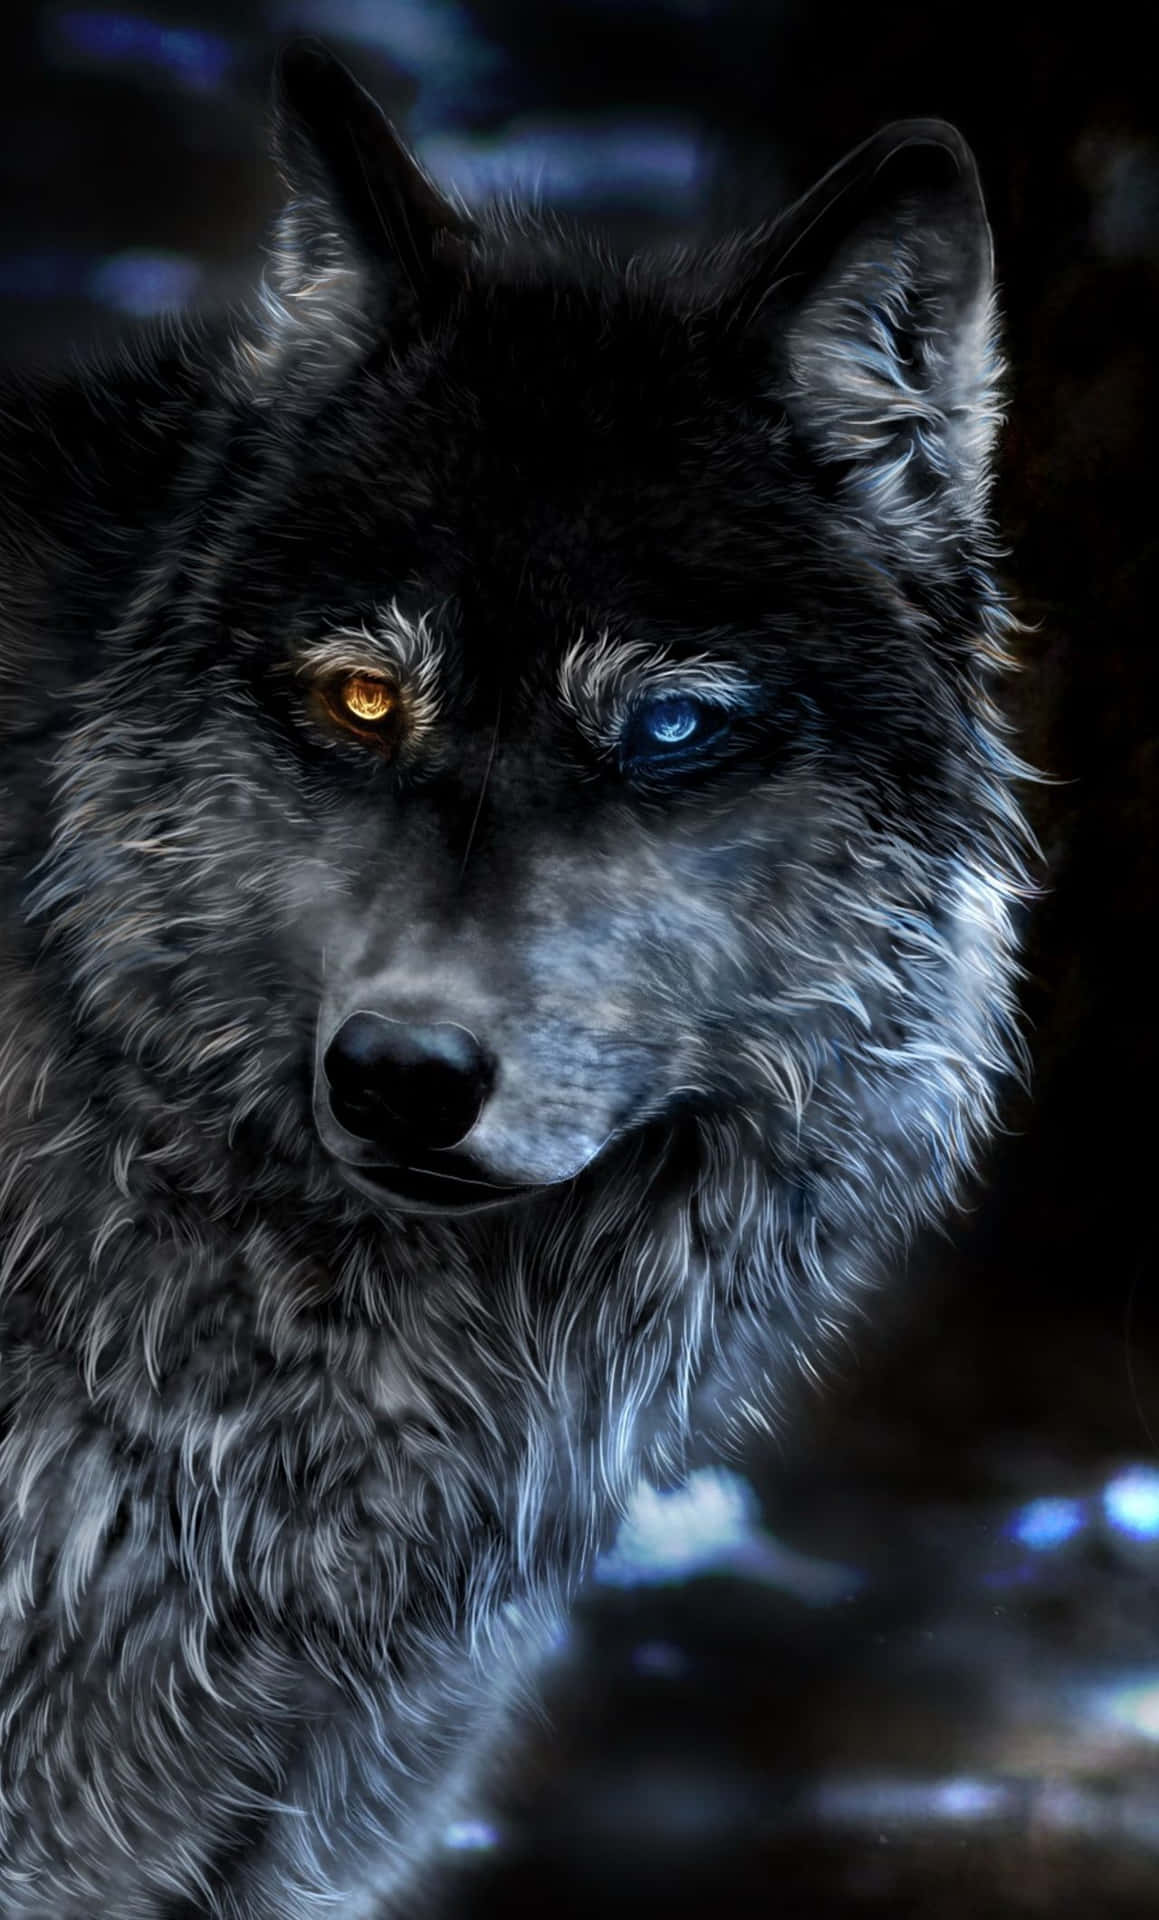 Marvel at this majestic wolf in its natural habitats Wallpaper